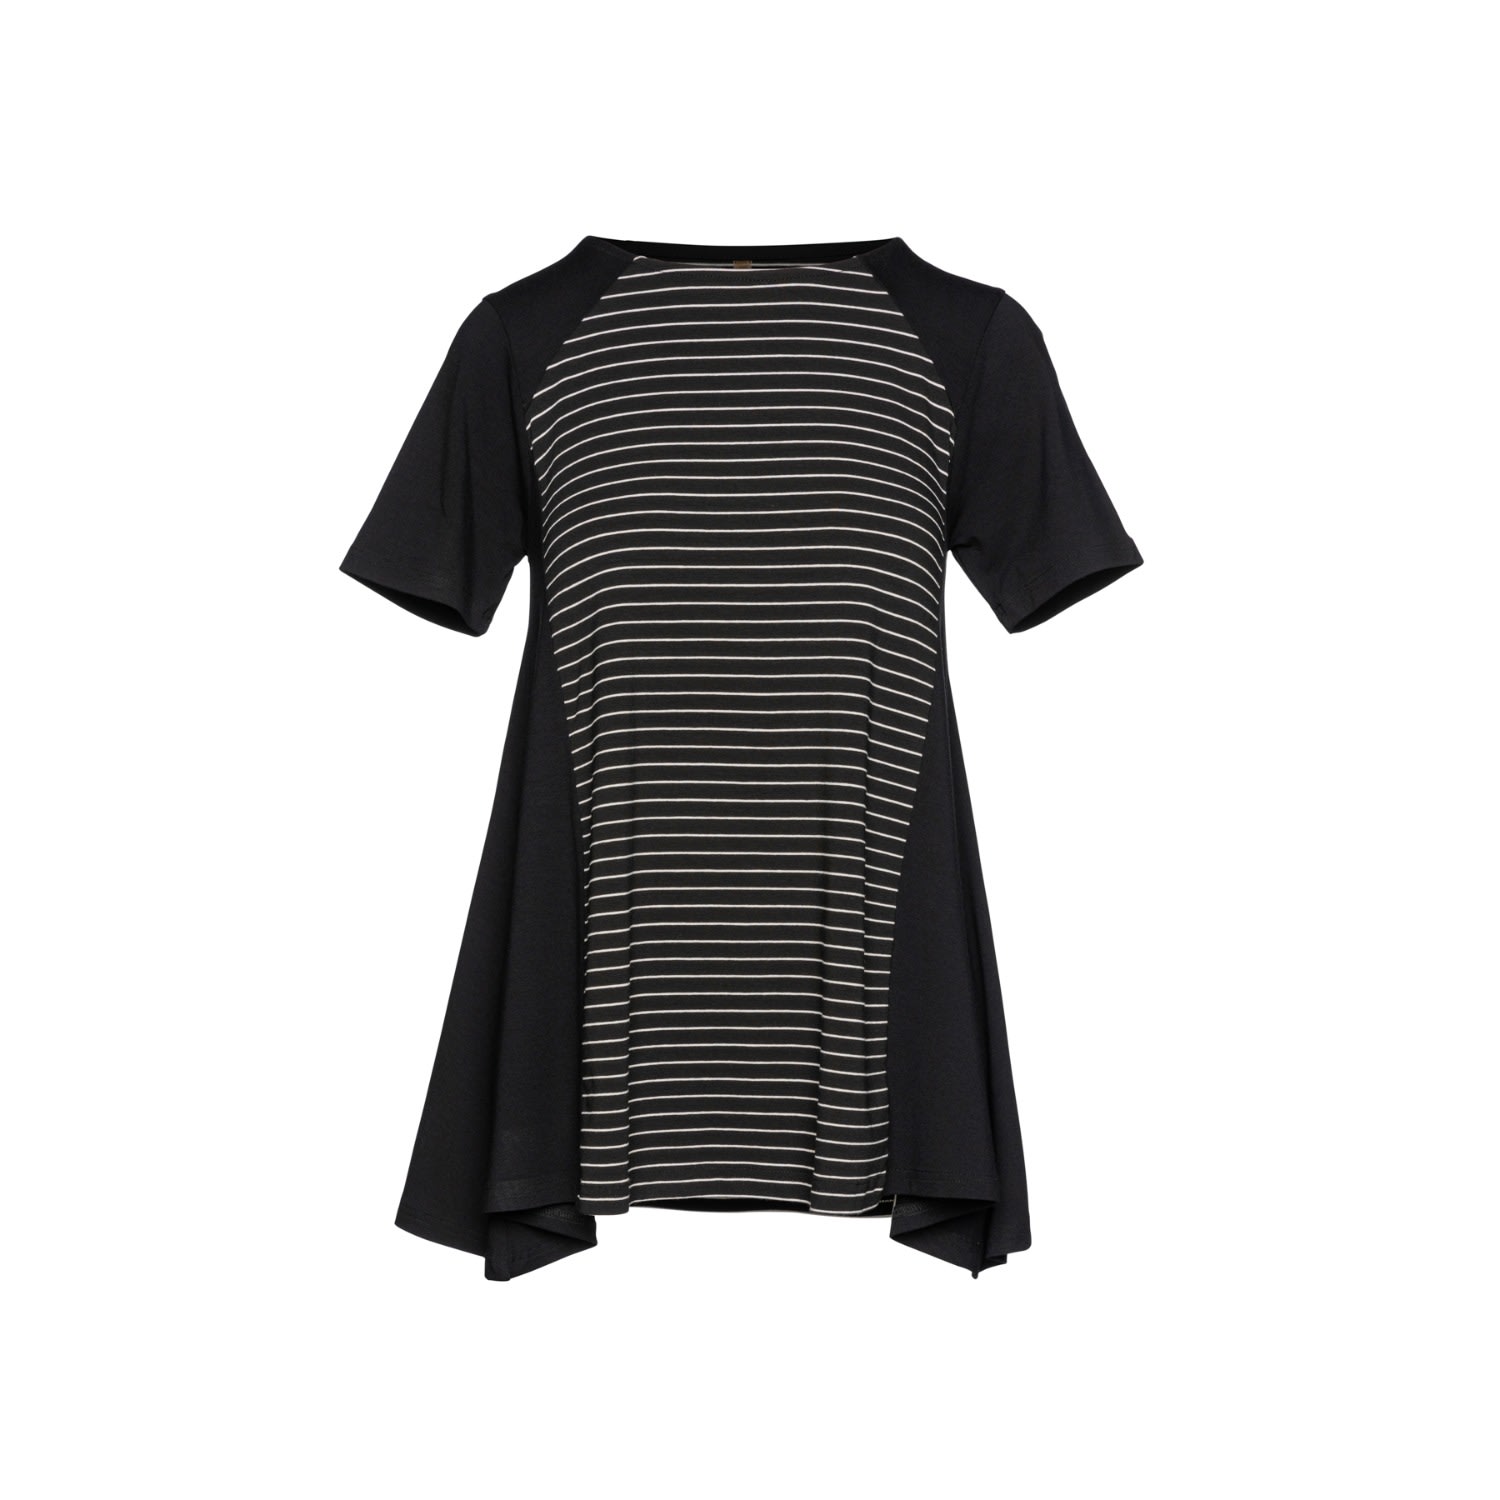 Women's Black Short Sleeve Top With Stripe Detail Small Conquista